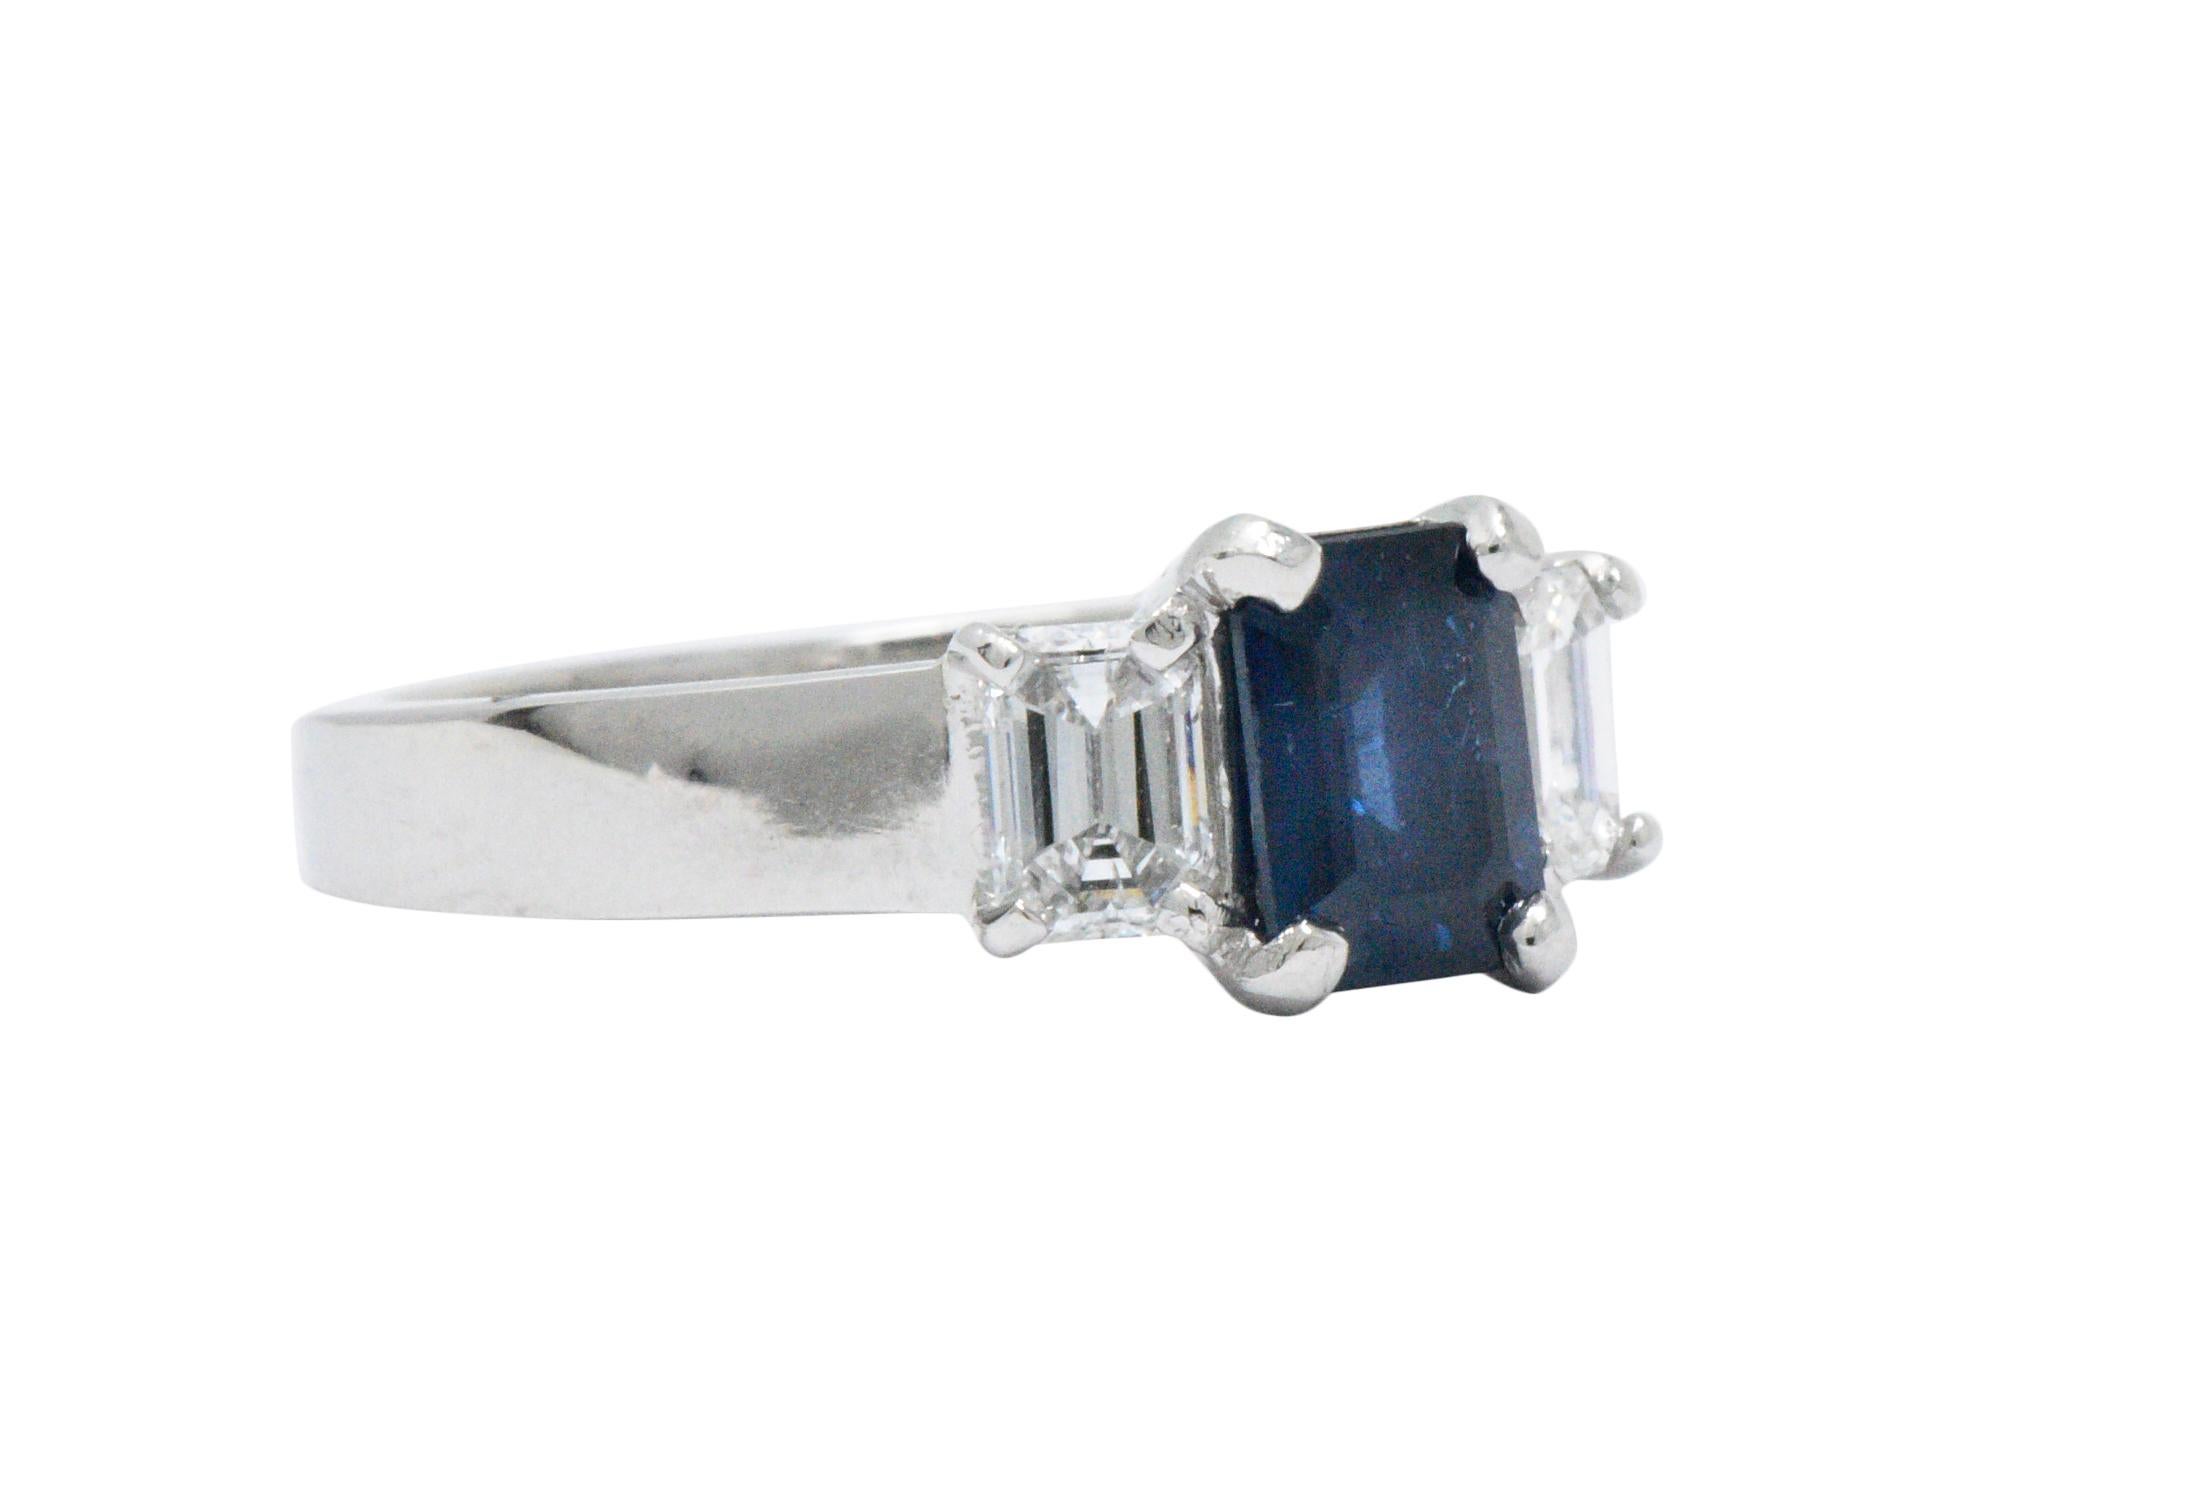 Centering an emerald cut sapphire weighing approximately 1.10 carats, deep soft rich royal blue

Flanked by 2 emerald cut diamonds weighing approximately 0.60 carats total, G color, VS to SI clarity

Clean geometric lines with a thick high polished